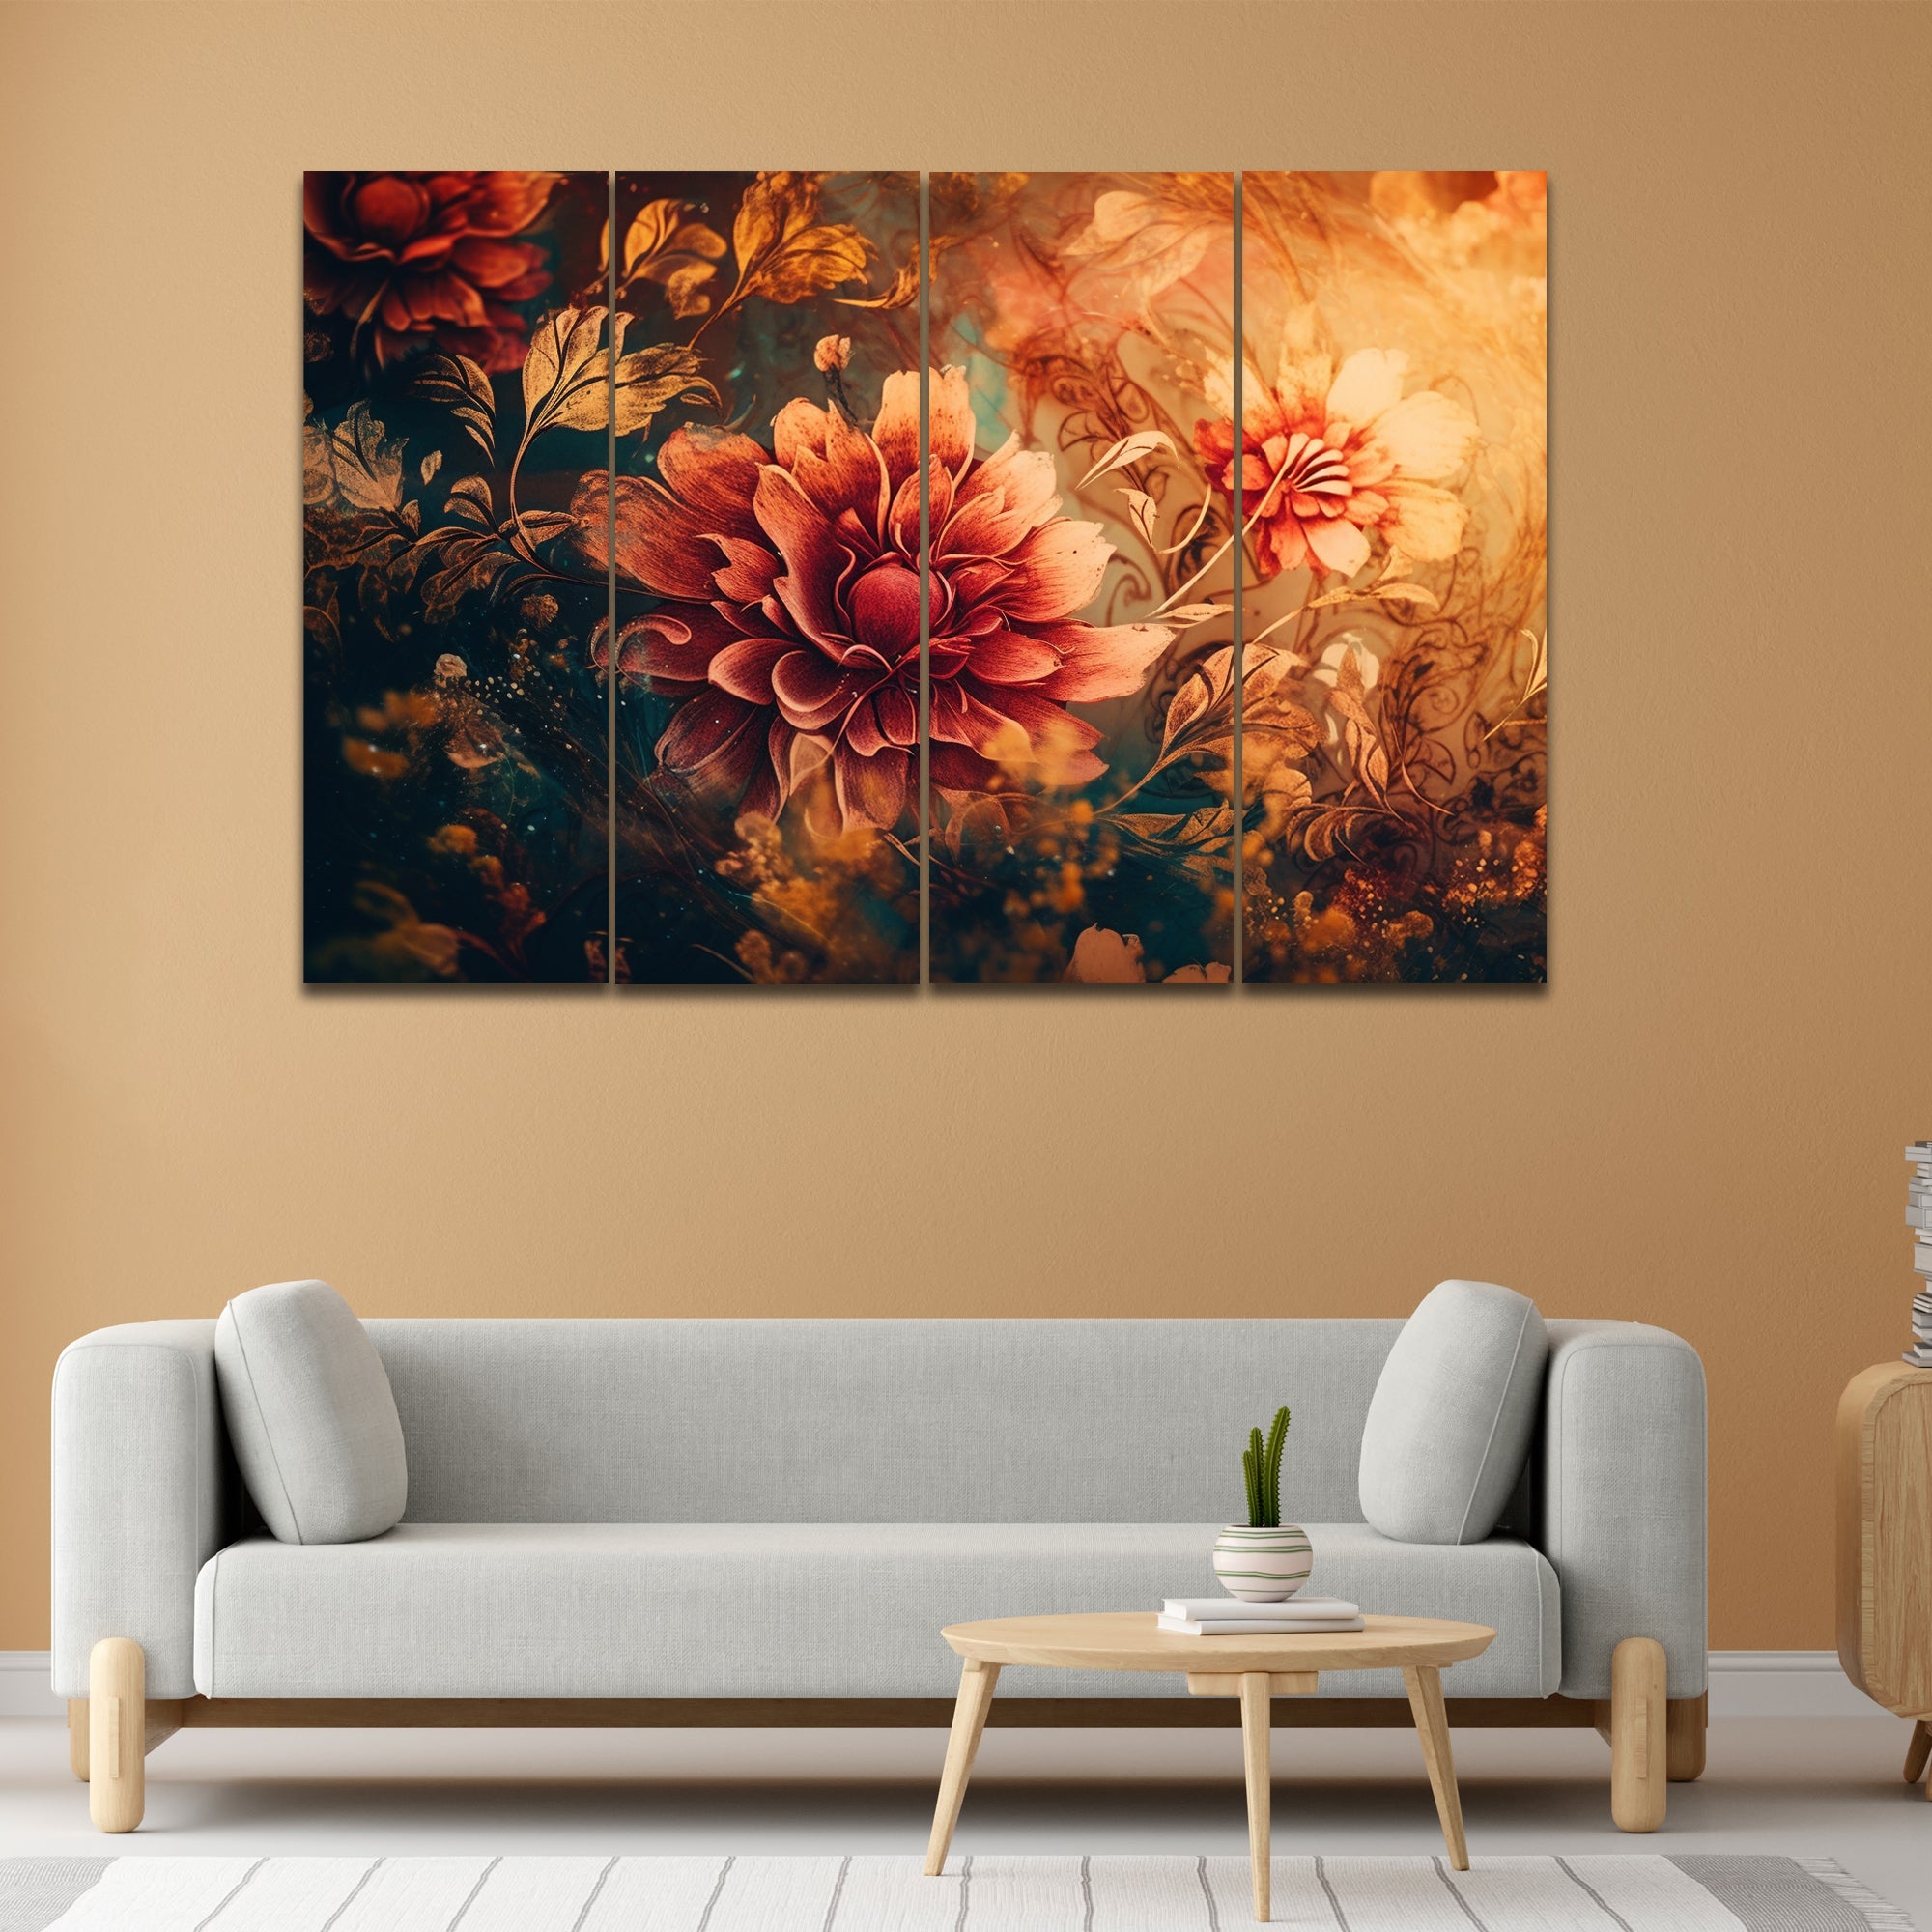 Abstract Art Floral In 4 Panel Painting